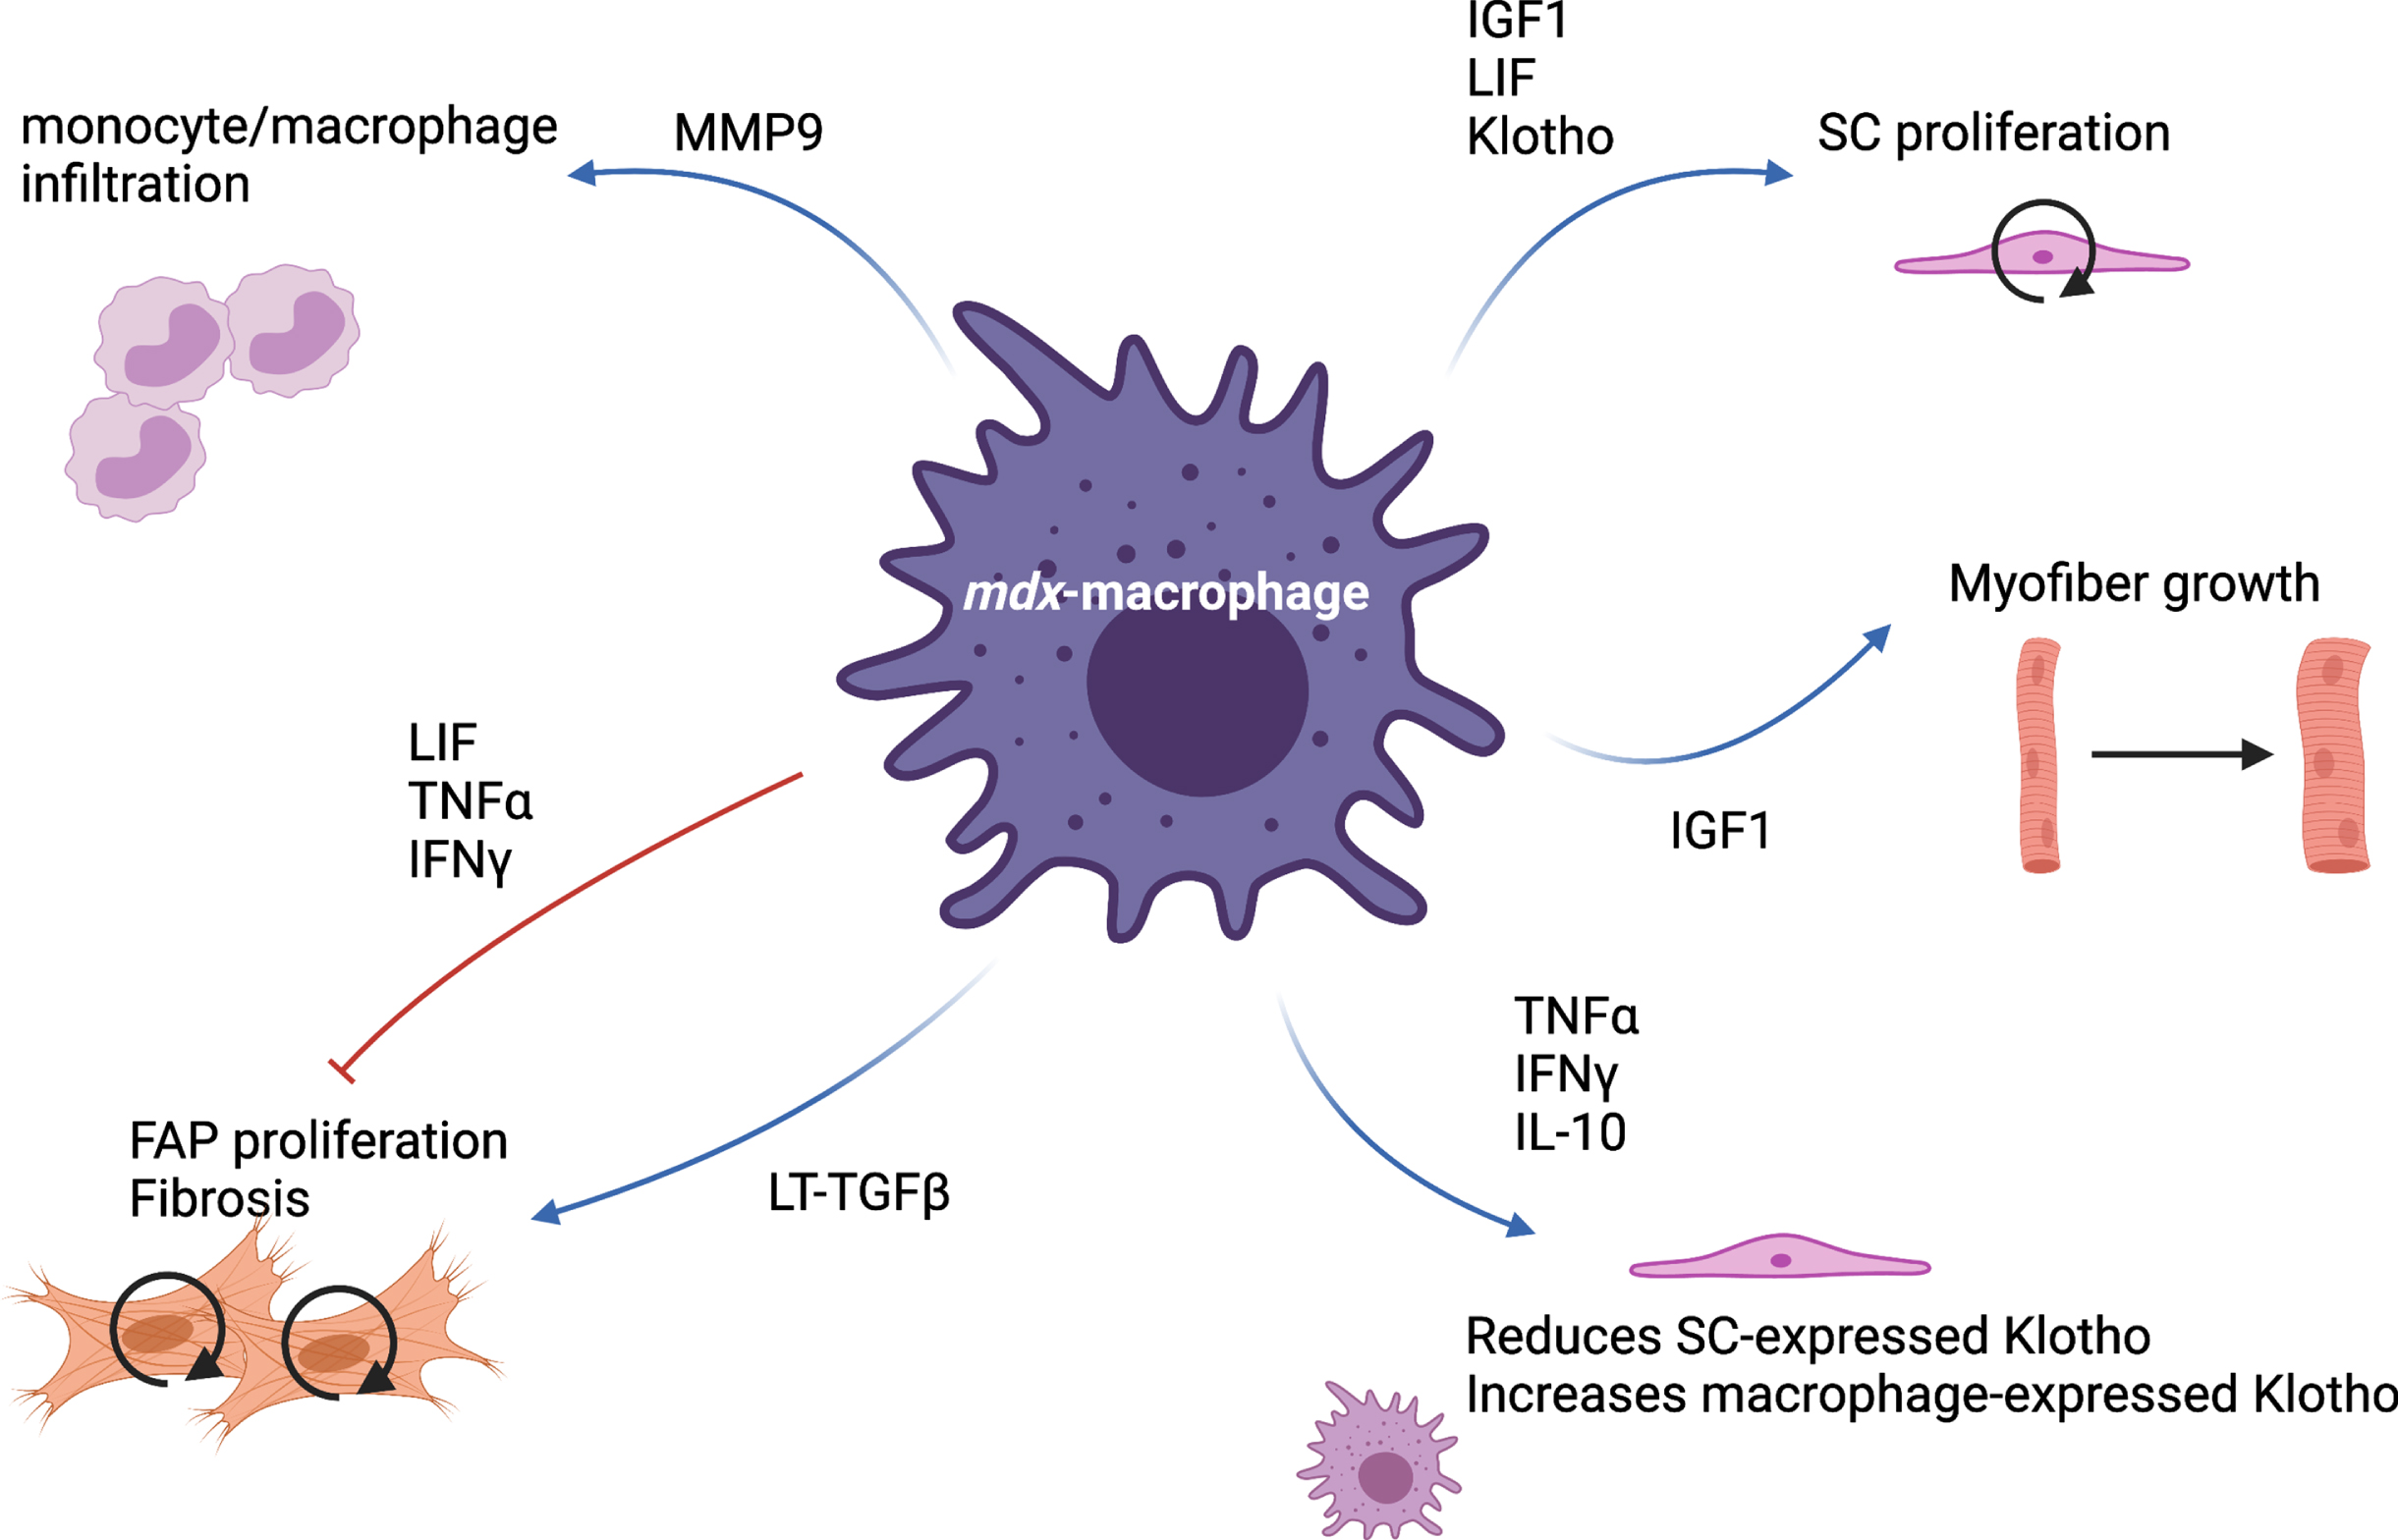 mdx-macrophage specific functions. Via the production of many cytokines and proteins, macrophages present in mdx muscle are able to simultaneously stimulate and inhibit various cellular processes such as monocyte infiltration, satellite cell (SC) proliferation, myofiber growth, fibro-adipogenic progenitor (FAP) proliferation and differentiation.